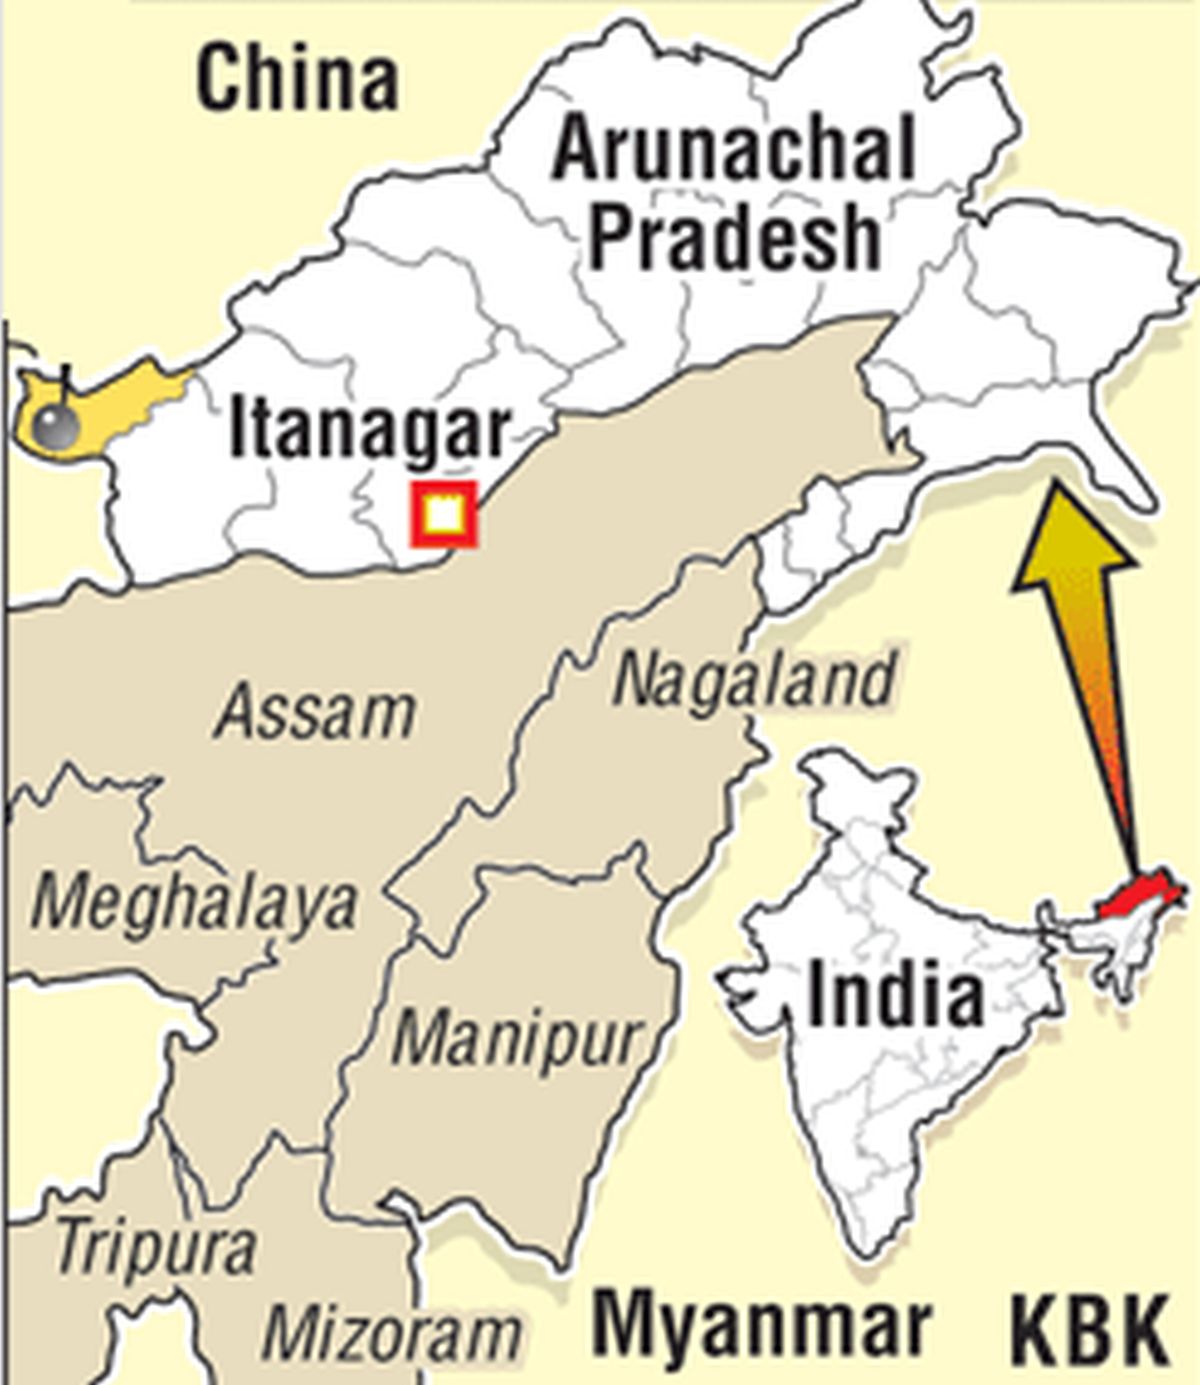 China seizes locally made maps showing Arunachal in India - Rediff.com